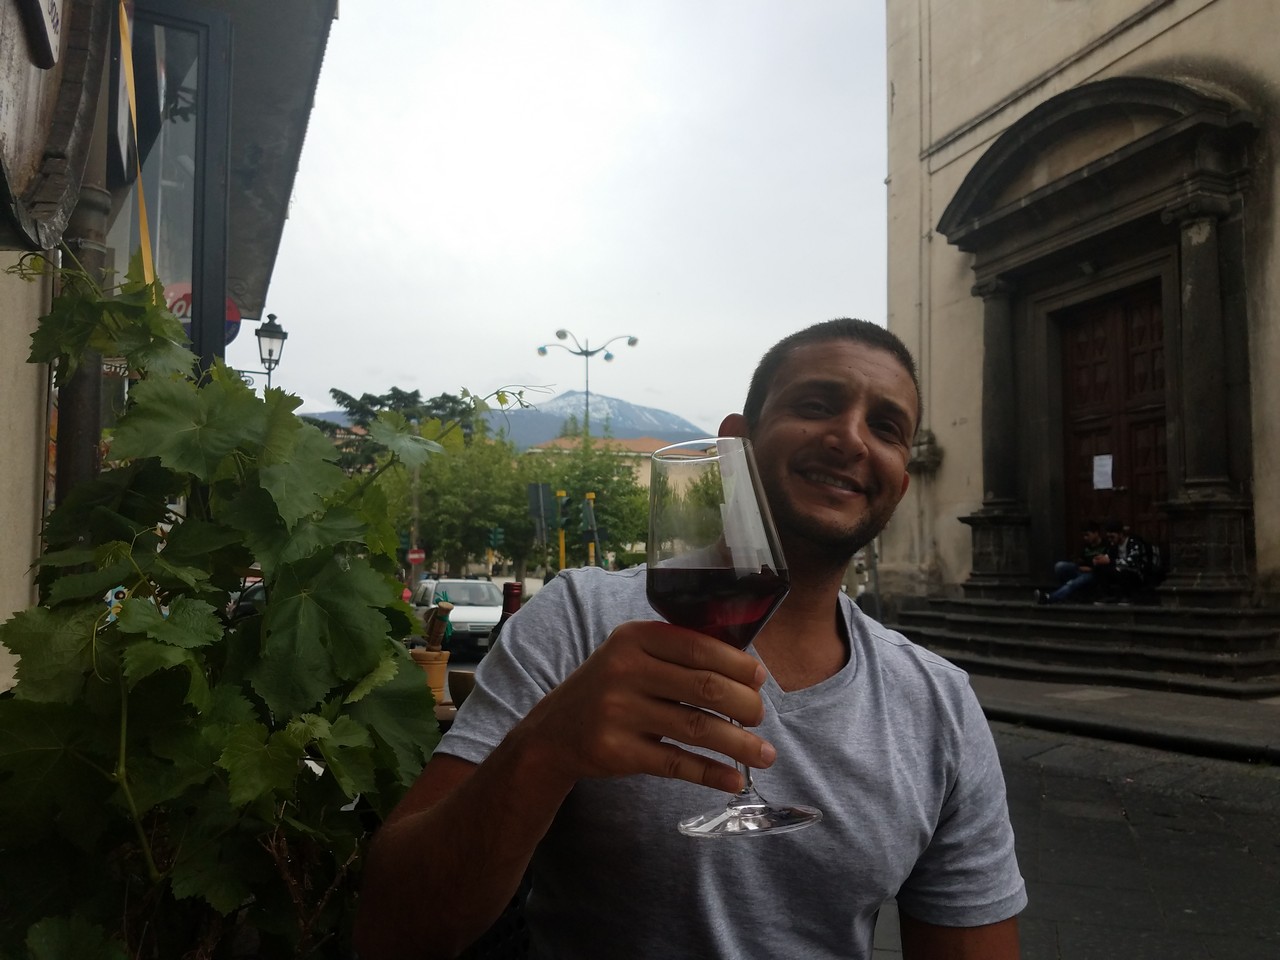 a man holding a wine glass